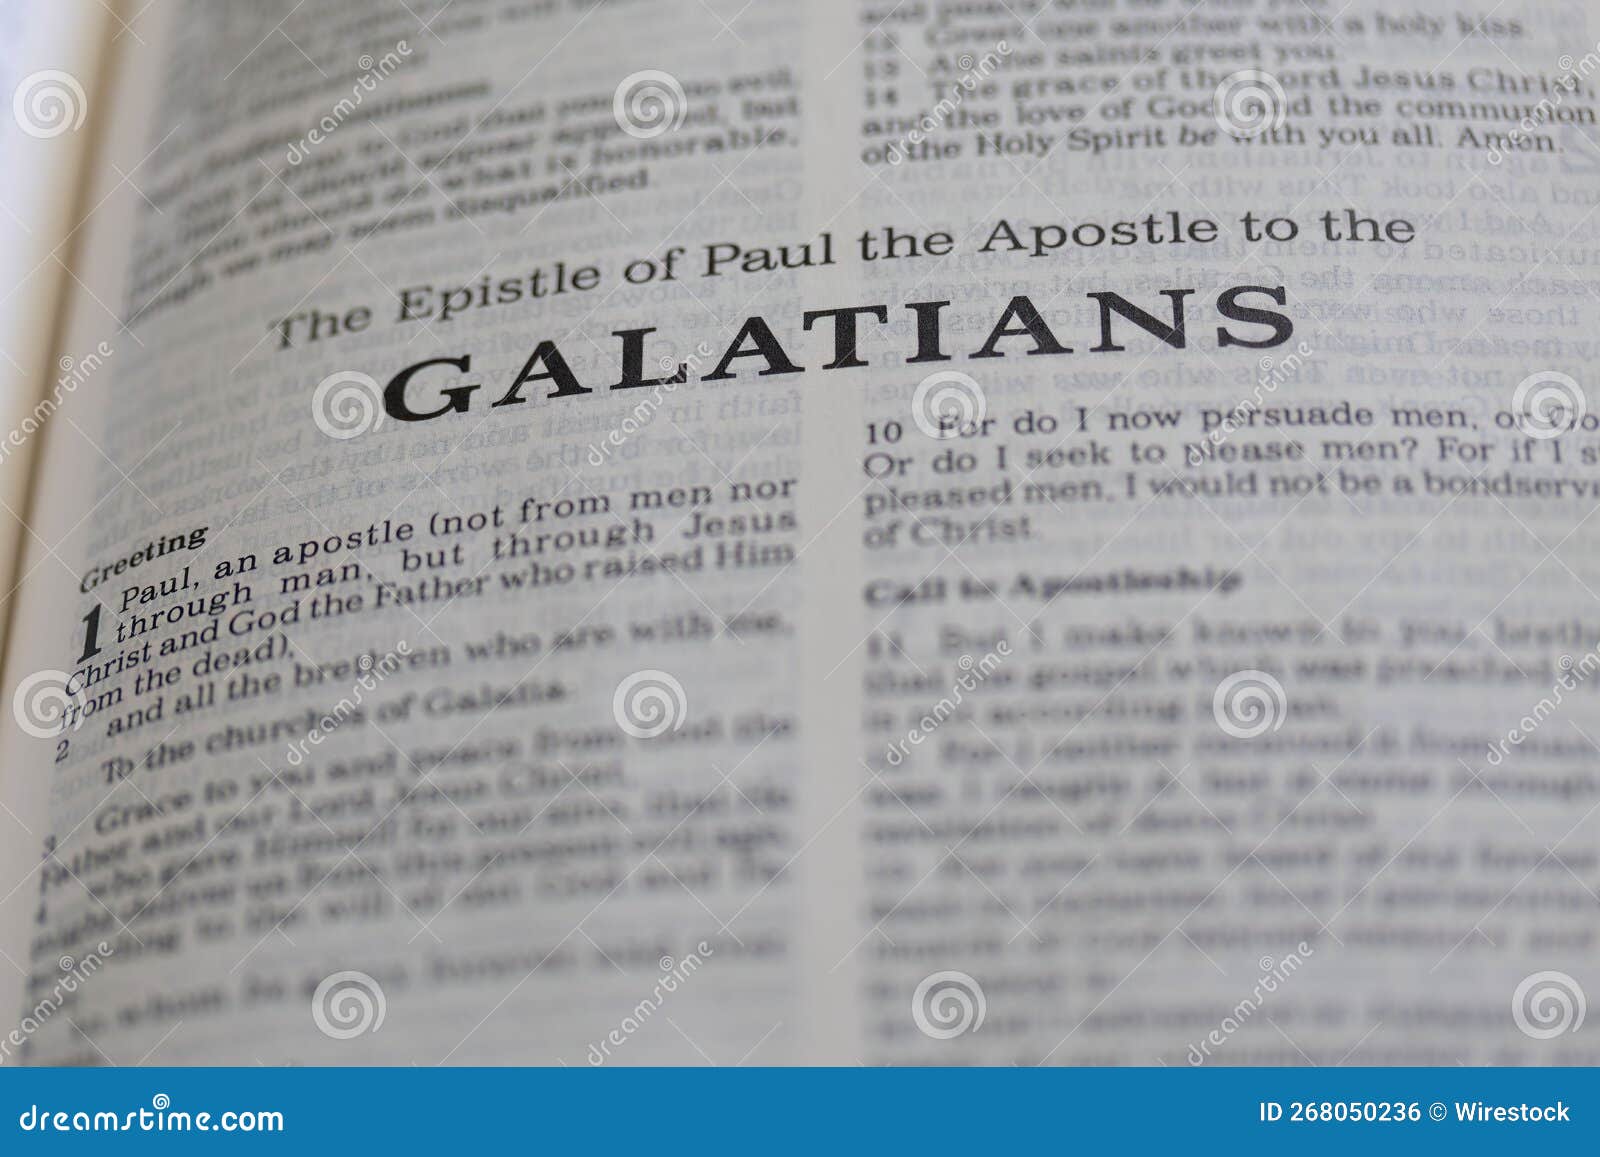 closeup of "the epistle of paul the apostle to the galatians" in holy bible